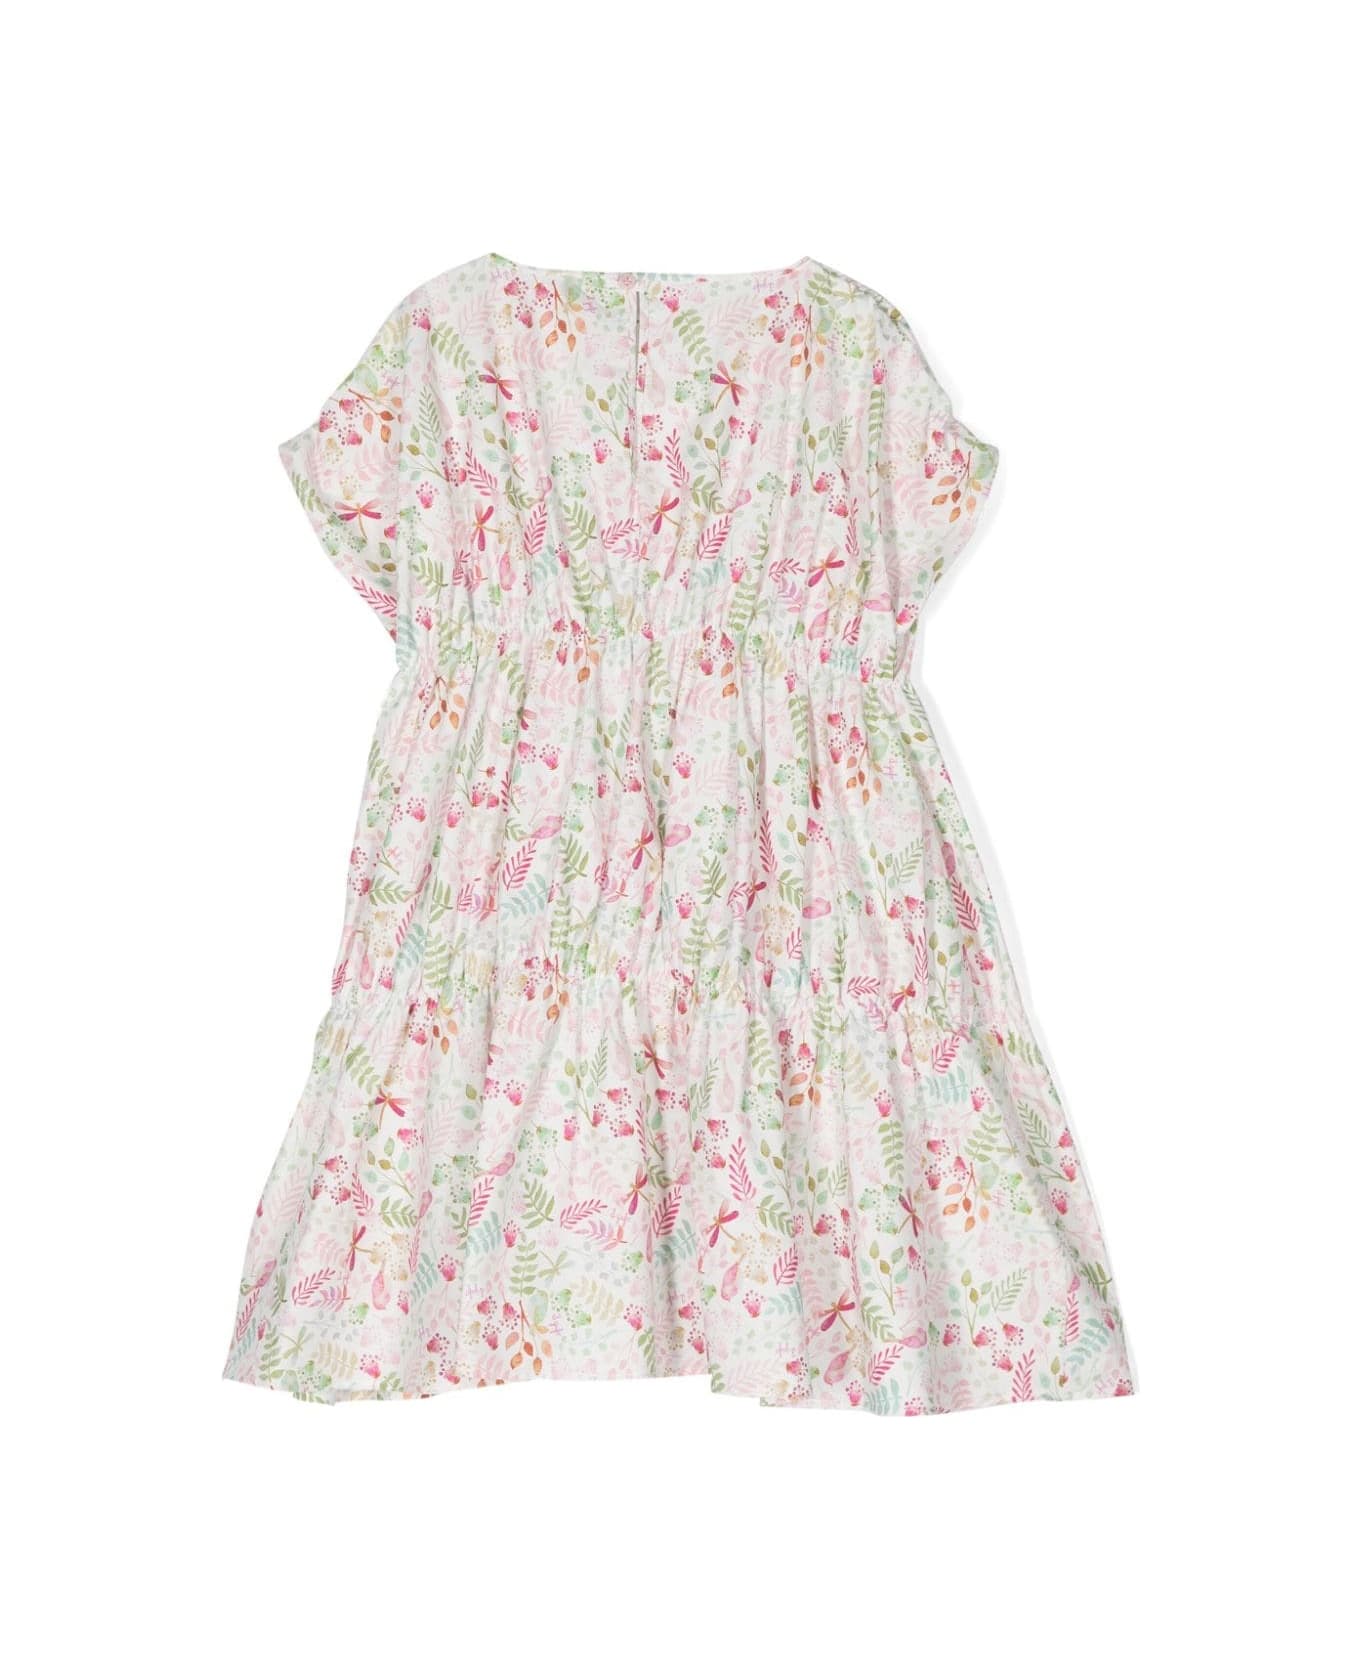 Il Gufo Dress With Pink Pepper Exclusive Print Design - Pink